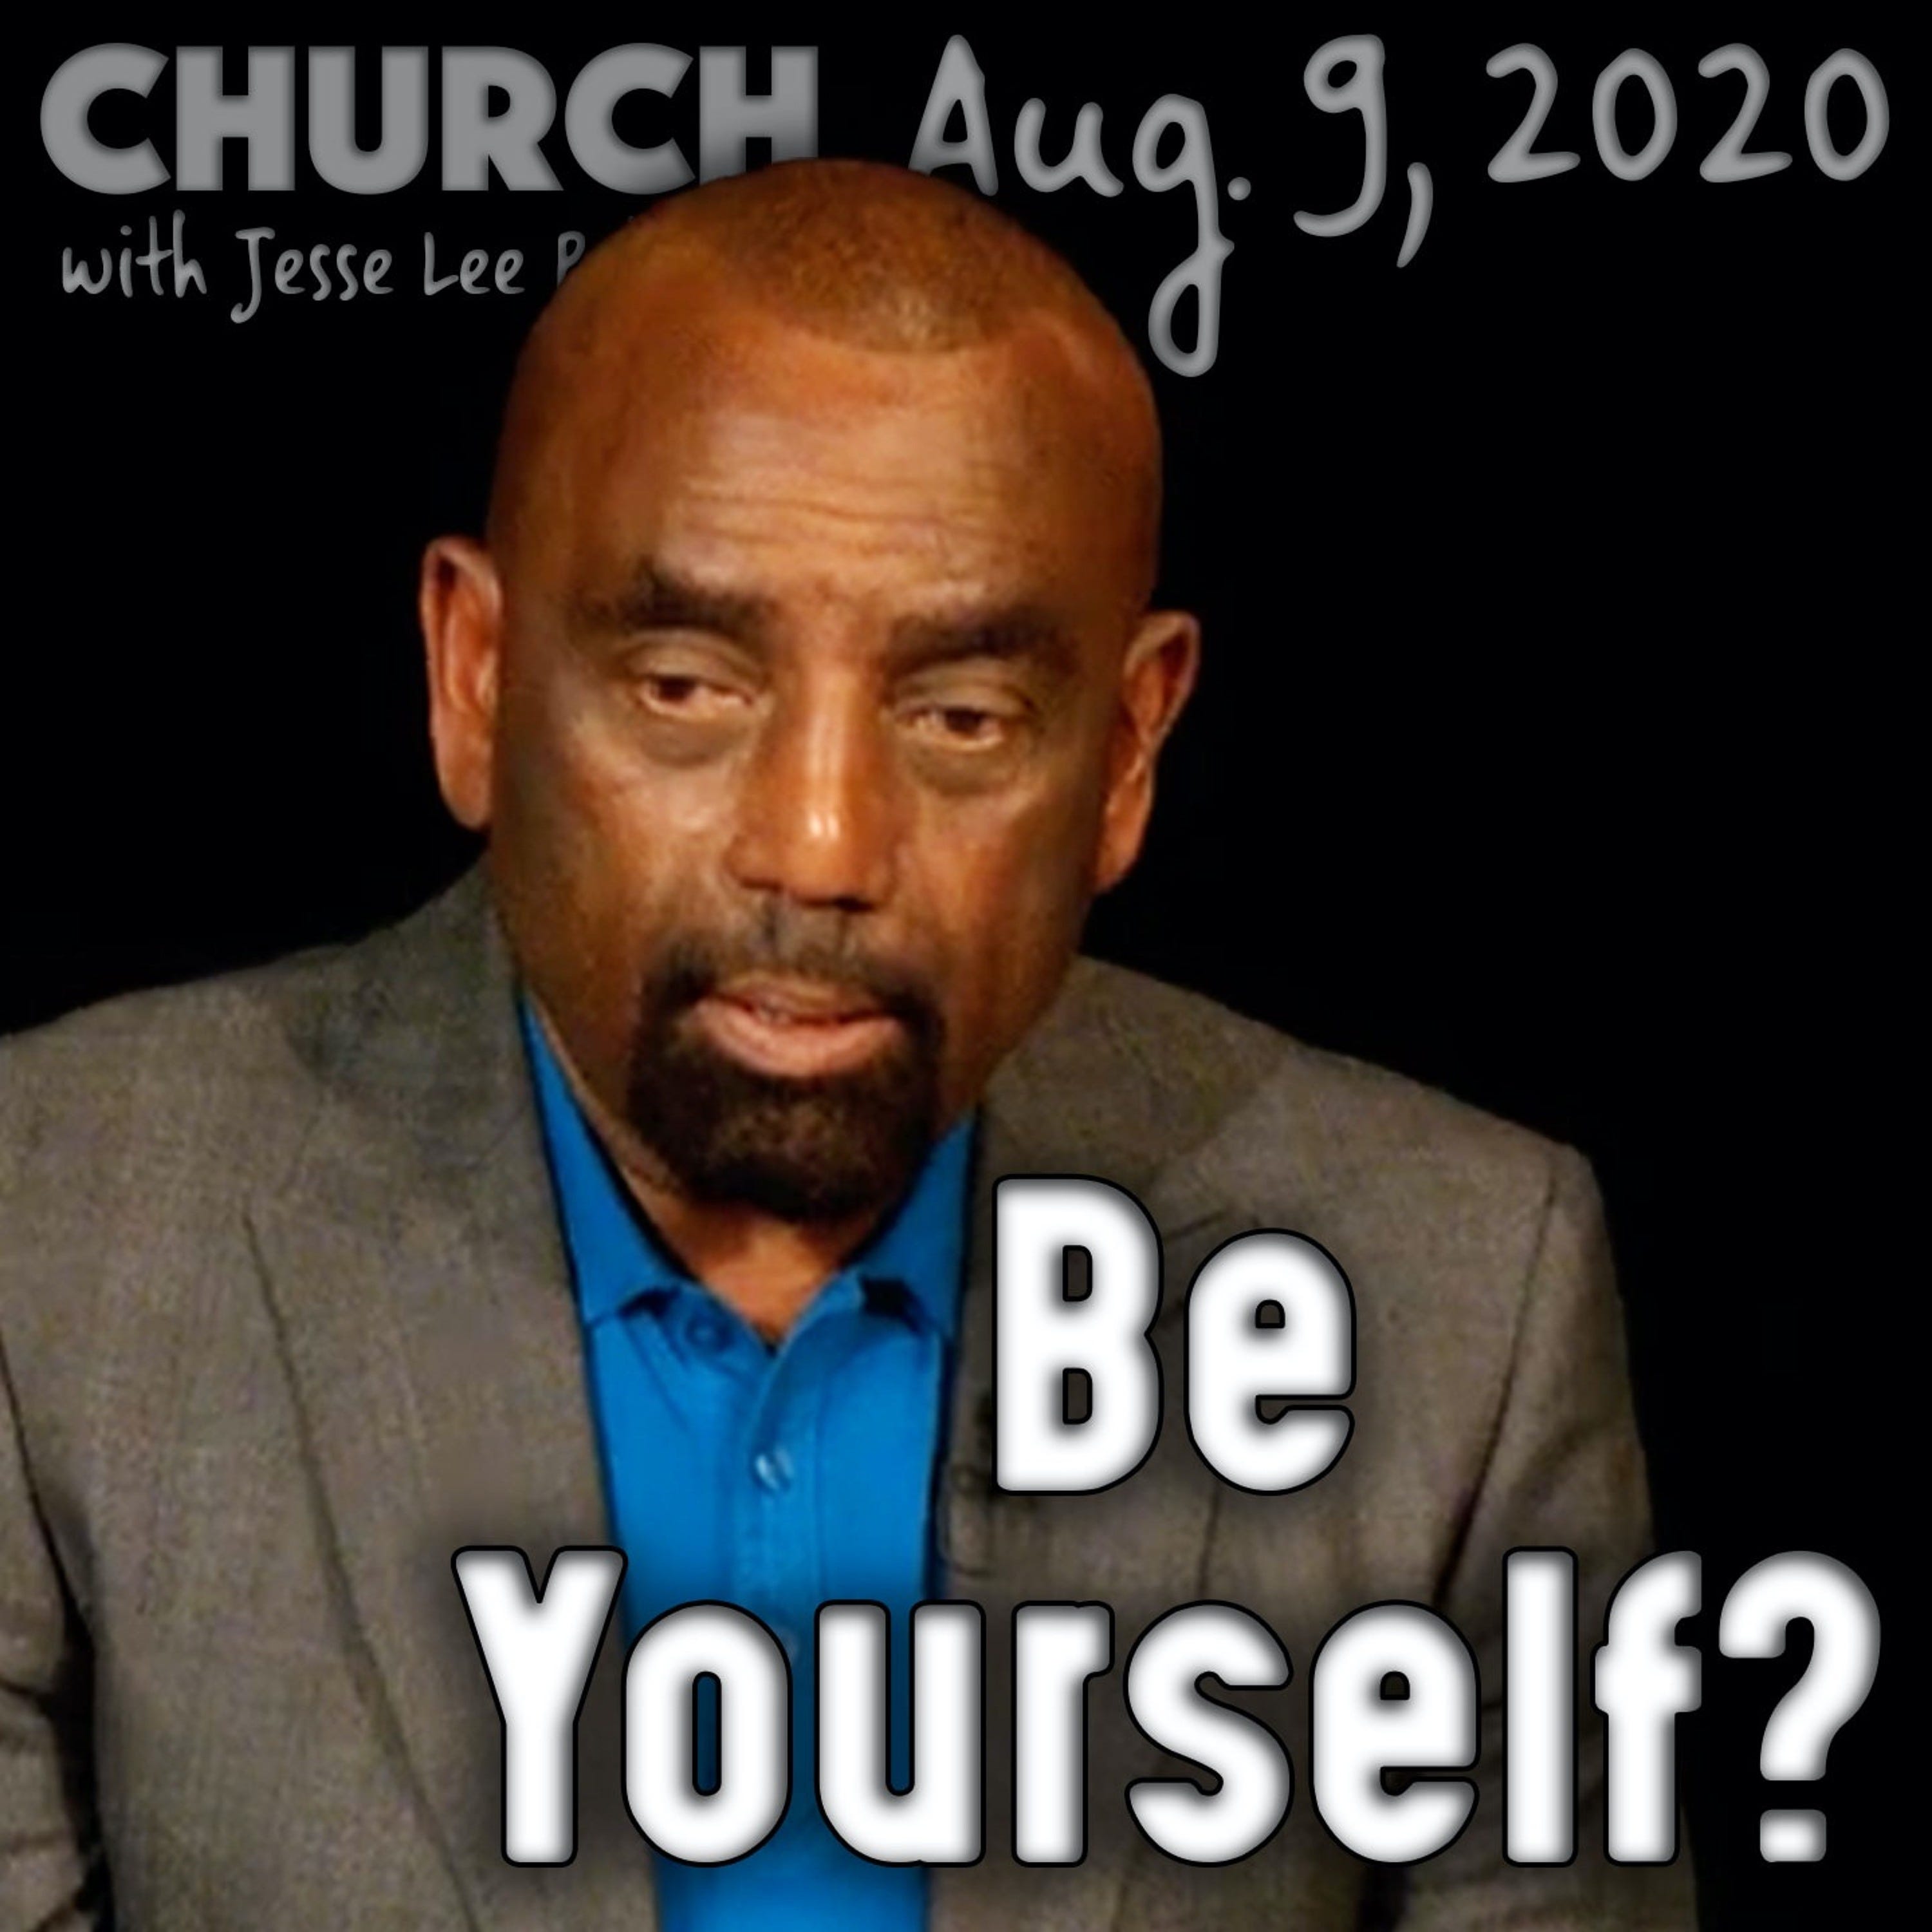 08/09/20 Mothers' Destruction; You vs Experts; Be Yourself? (Church)